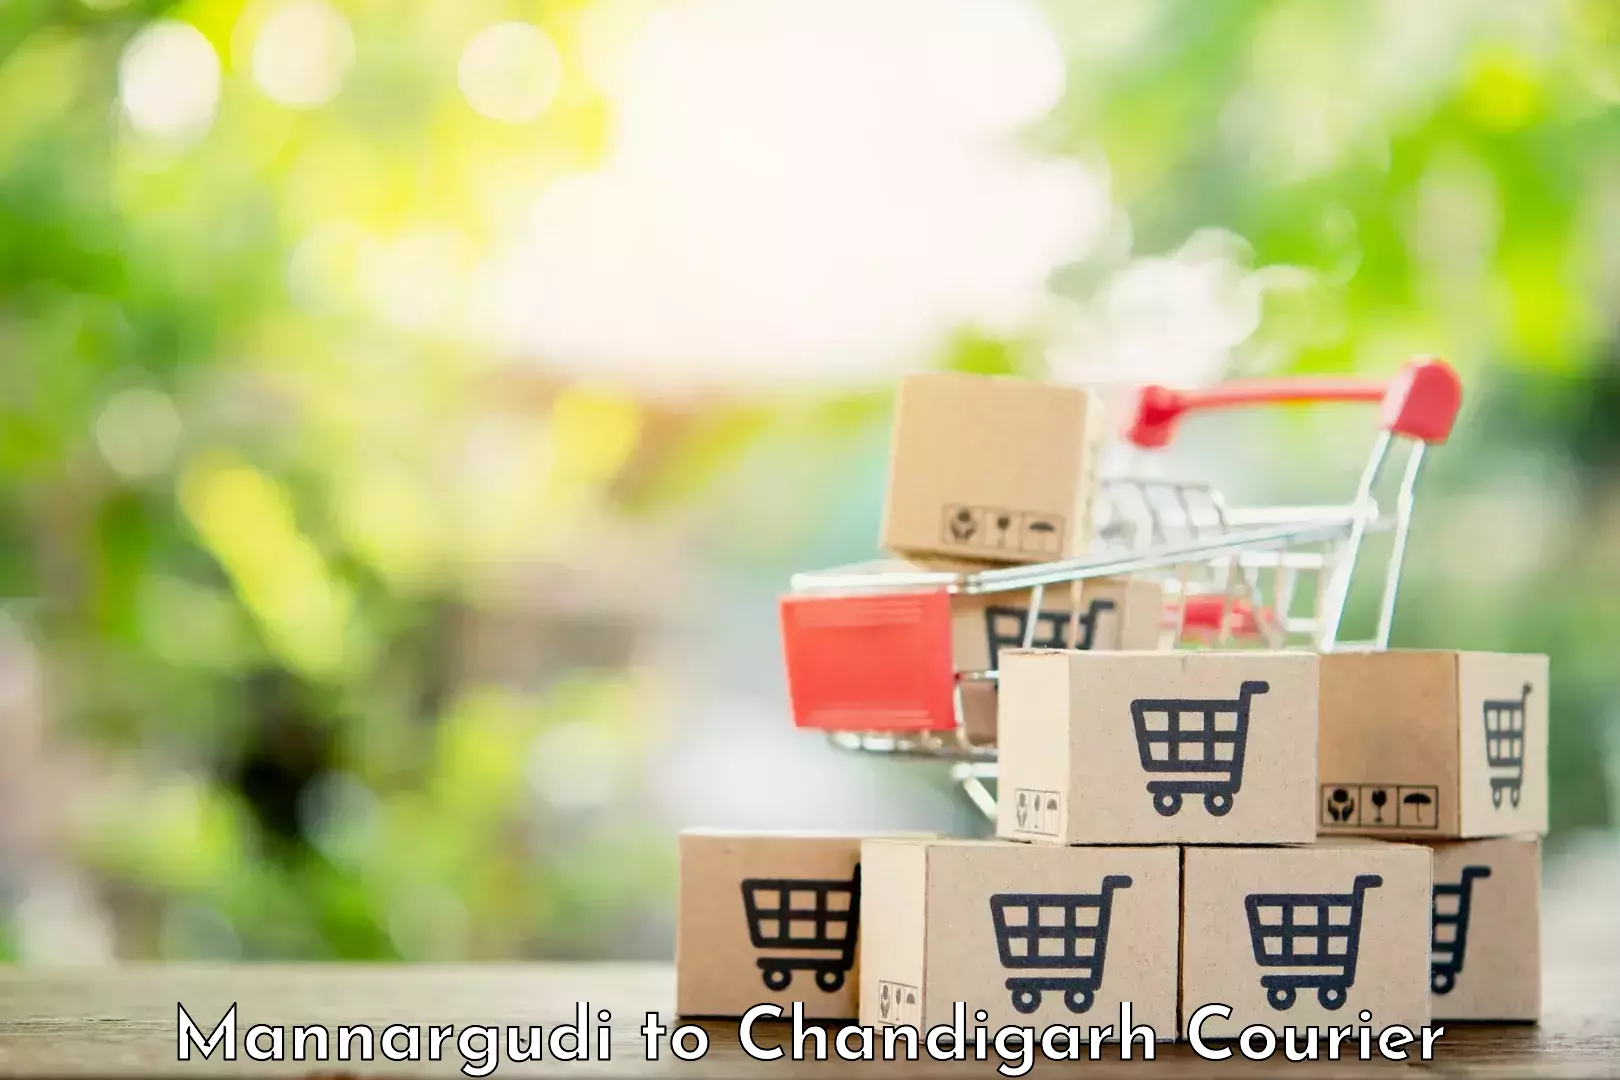 Subscription-based courier Mannargudi to Chandigarh